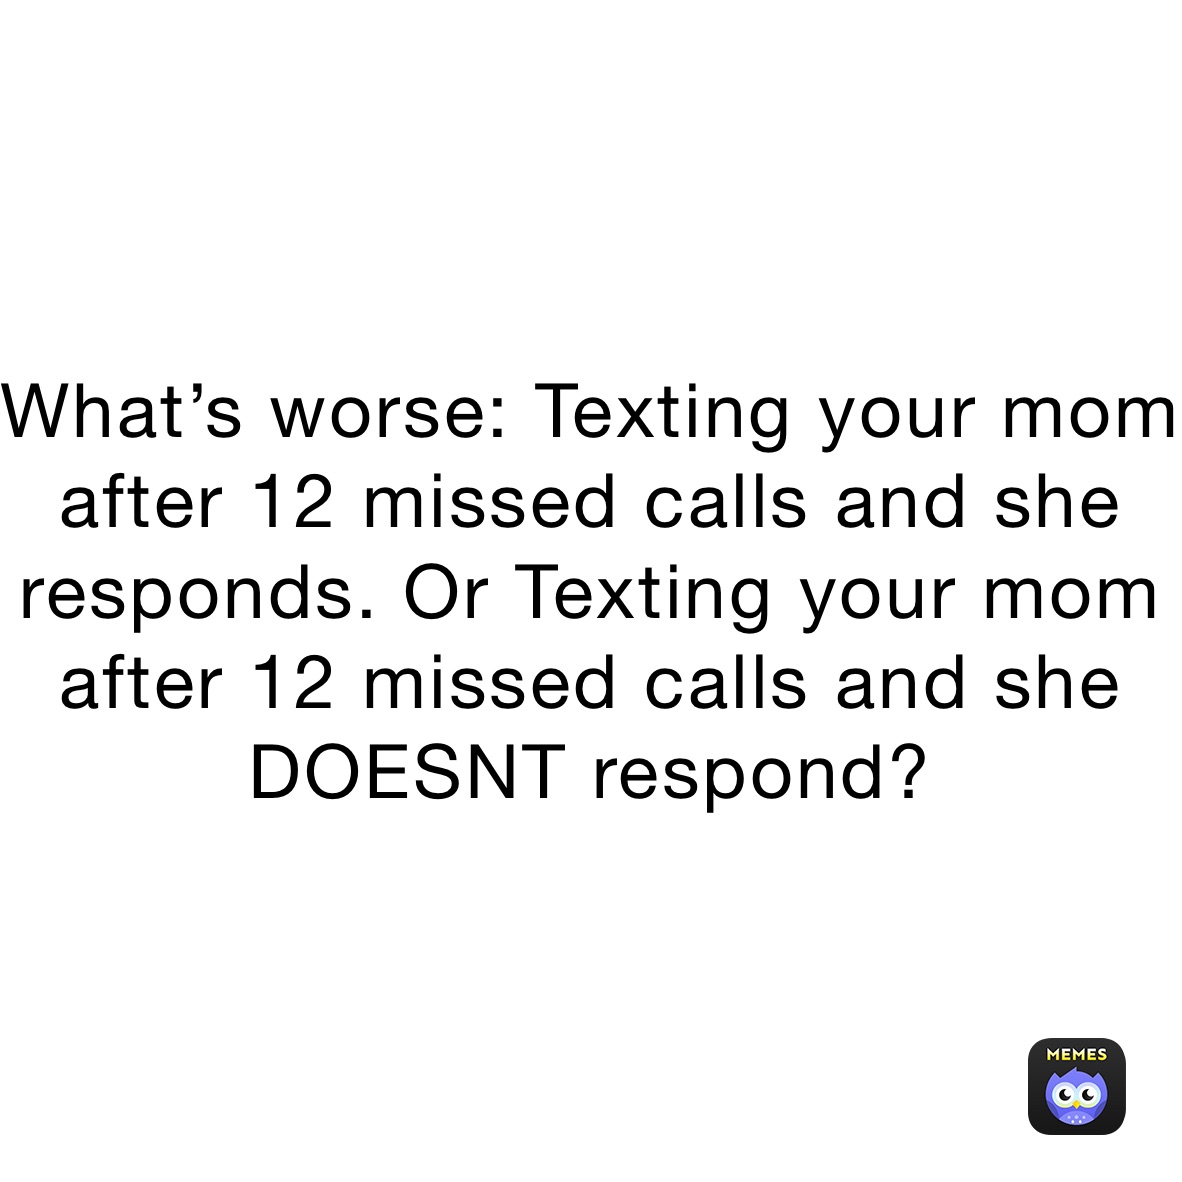 What’s worse: Texting your mom after 12 missed calls and she responds. Or Texting your mom after 12 missed calls and she DOESNT respond?